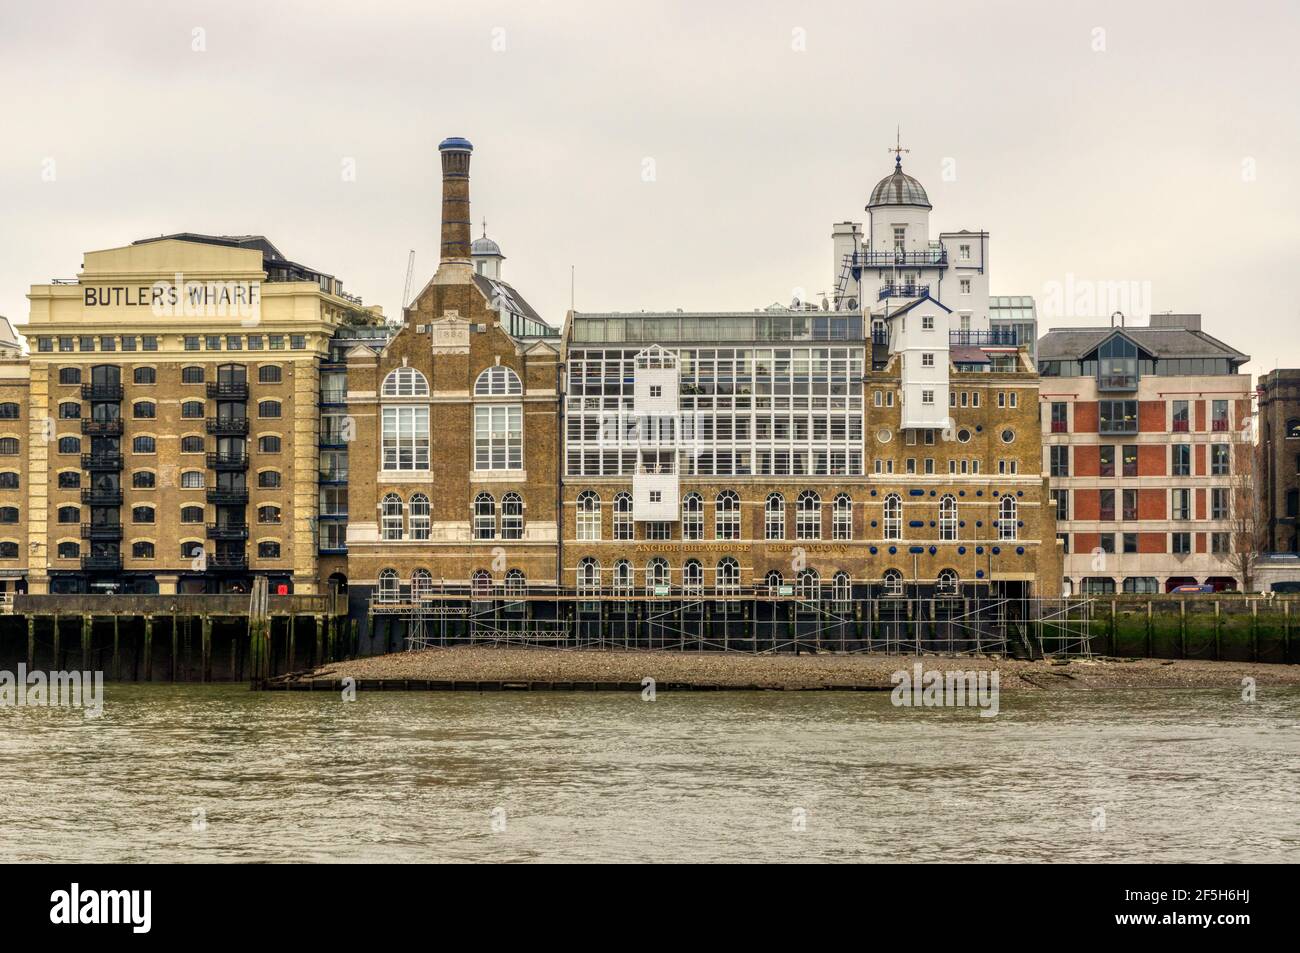 Butler's Wharf and the old Courage Anchor brewery on the Thames in Bermondsey.  Now luxury flats. Stock Photo